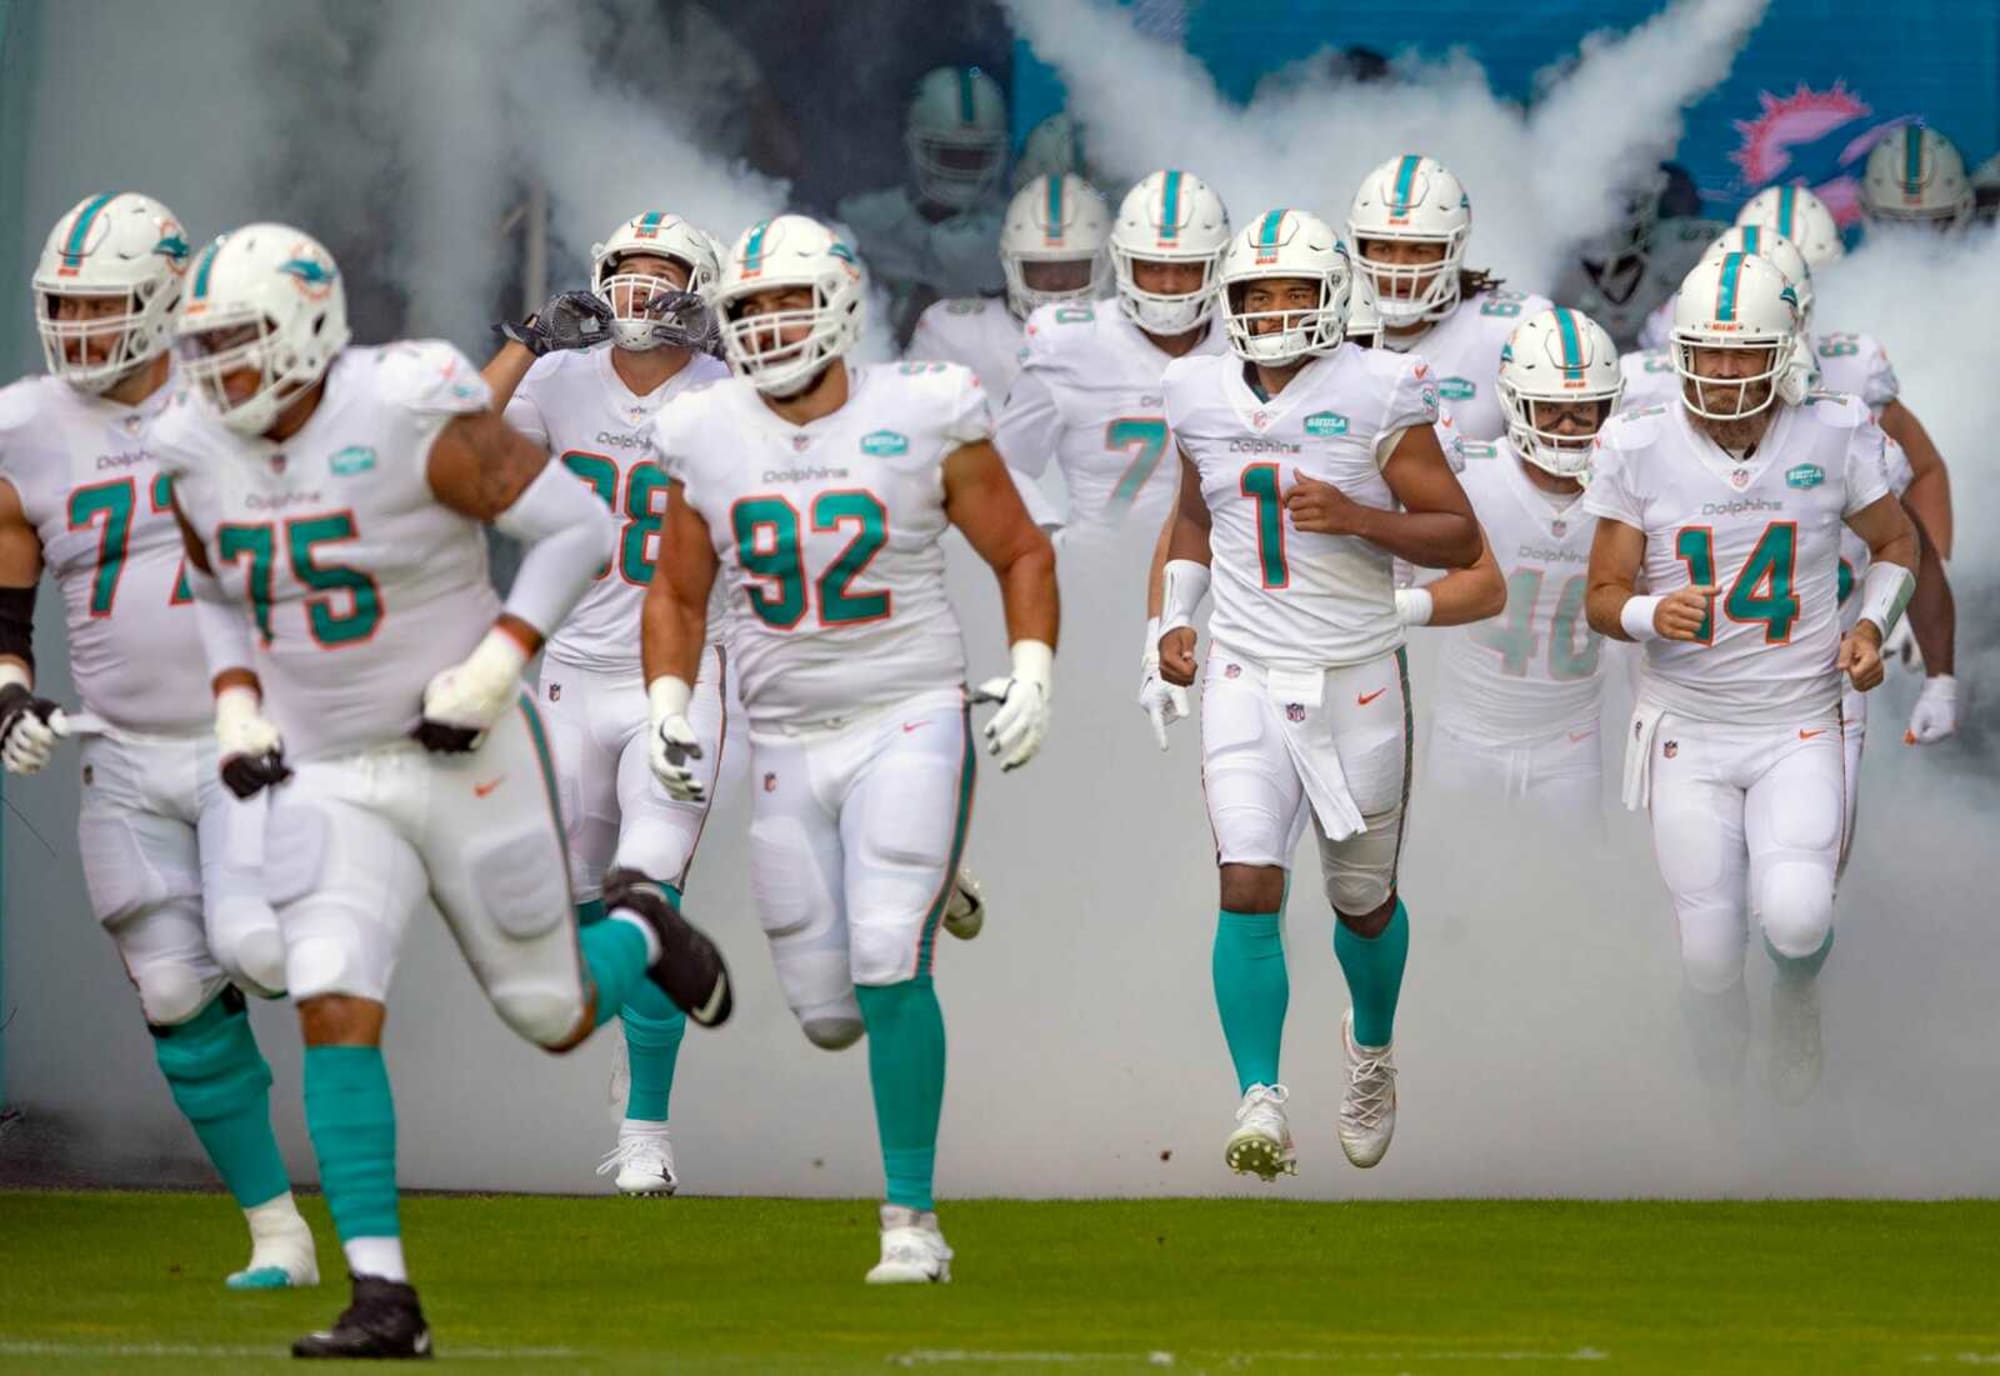 Patriots Week 1 roadmap to the Miami Dolphins: The Mac era begins